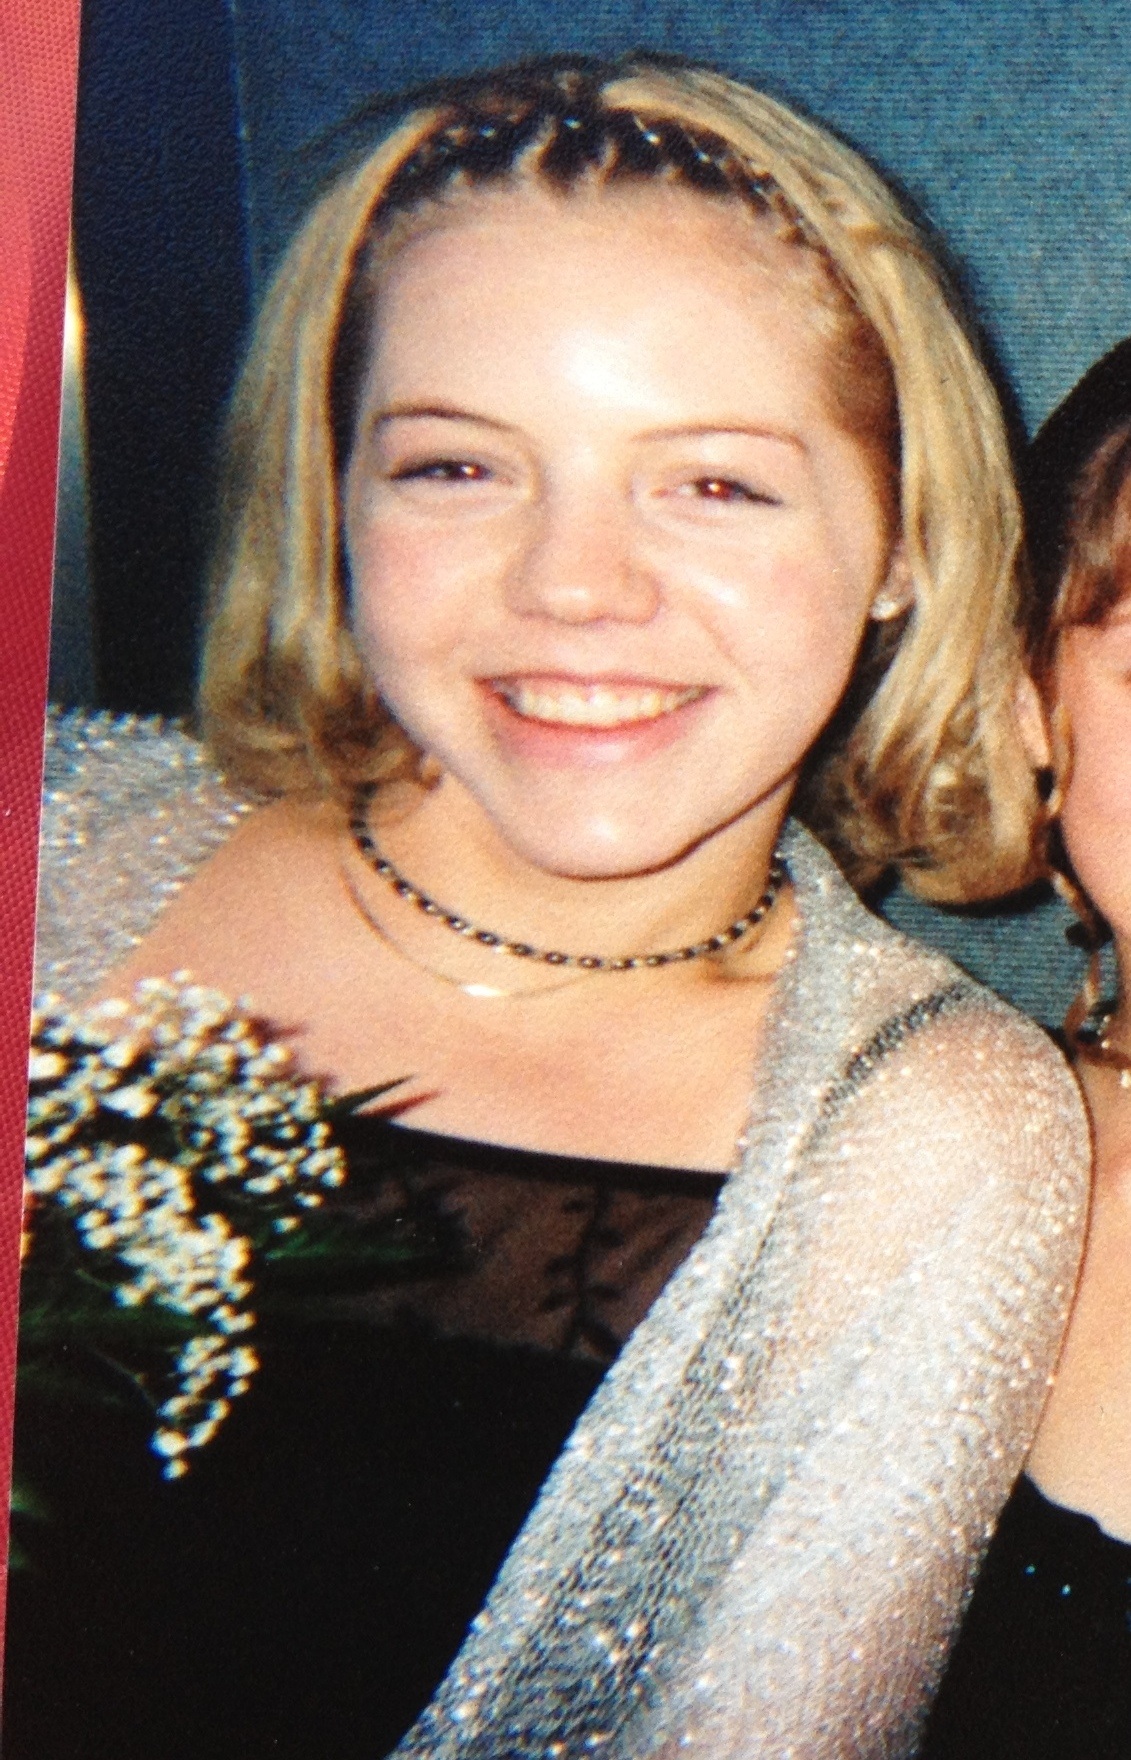 My barely 13 baby-self, attending my first high school dance